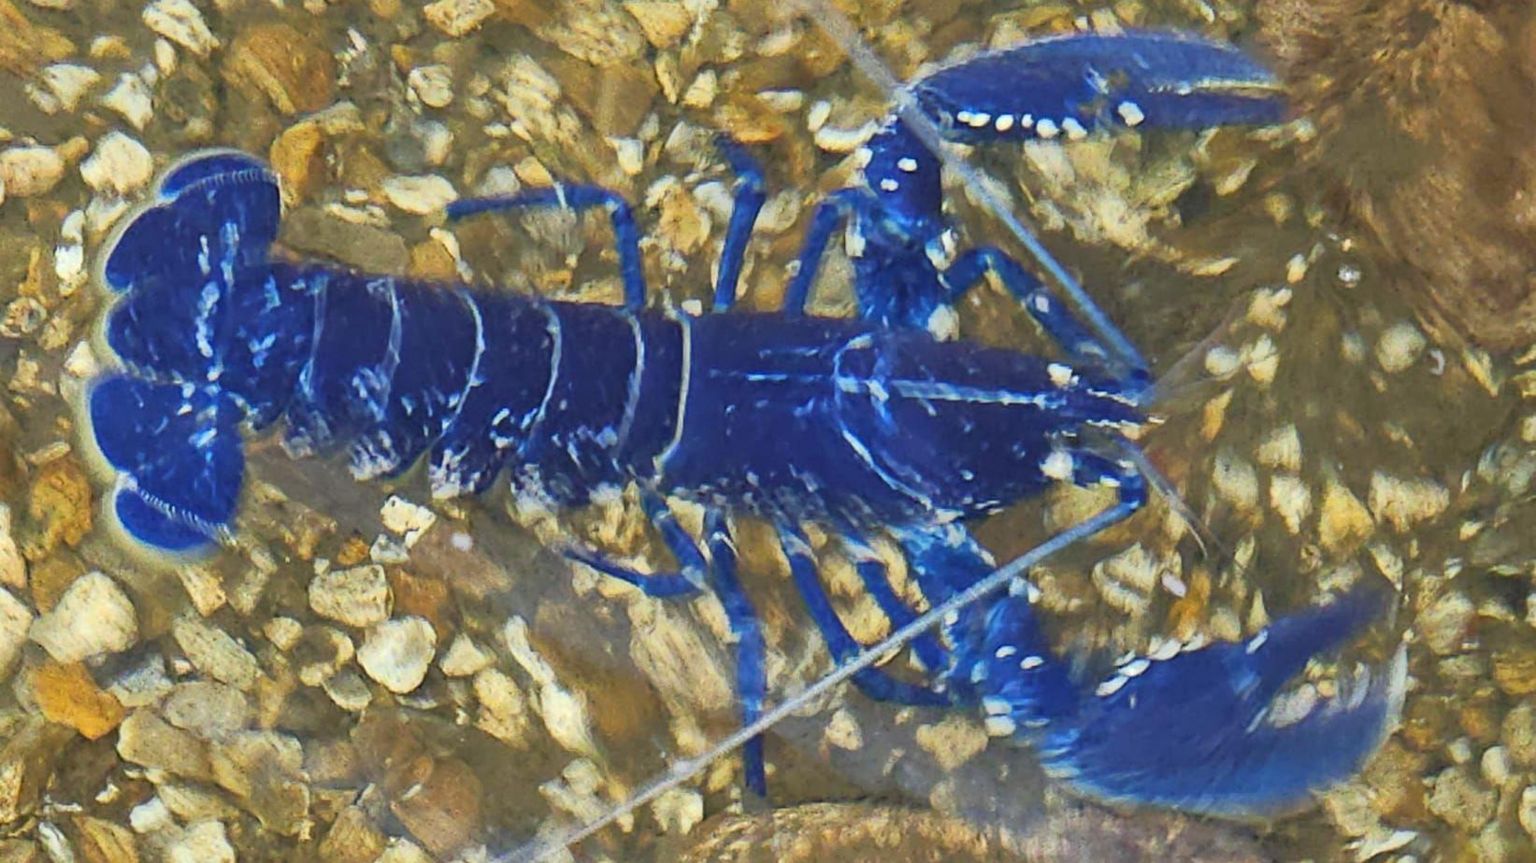 The blue lobster in shallow water